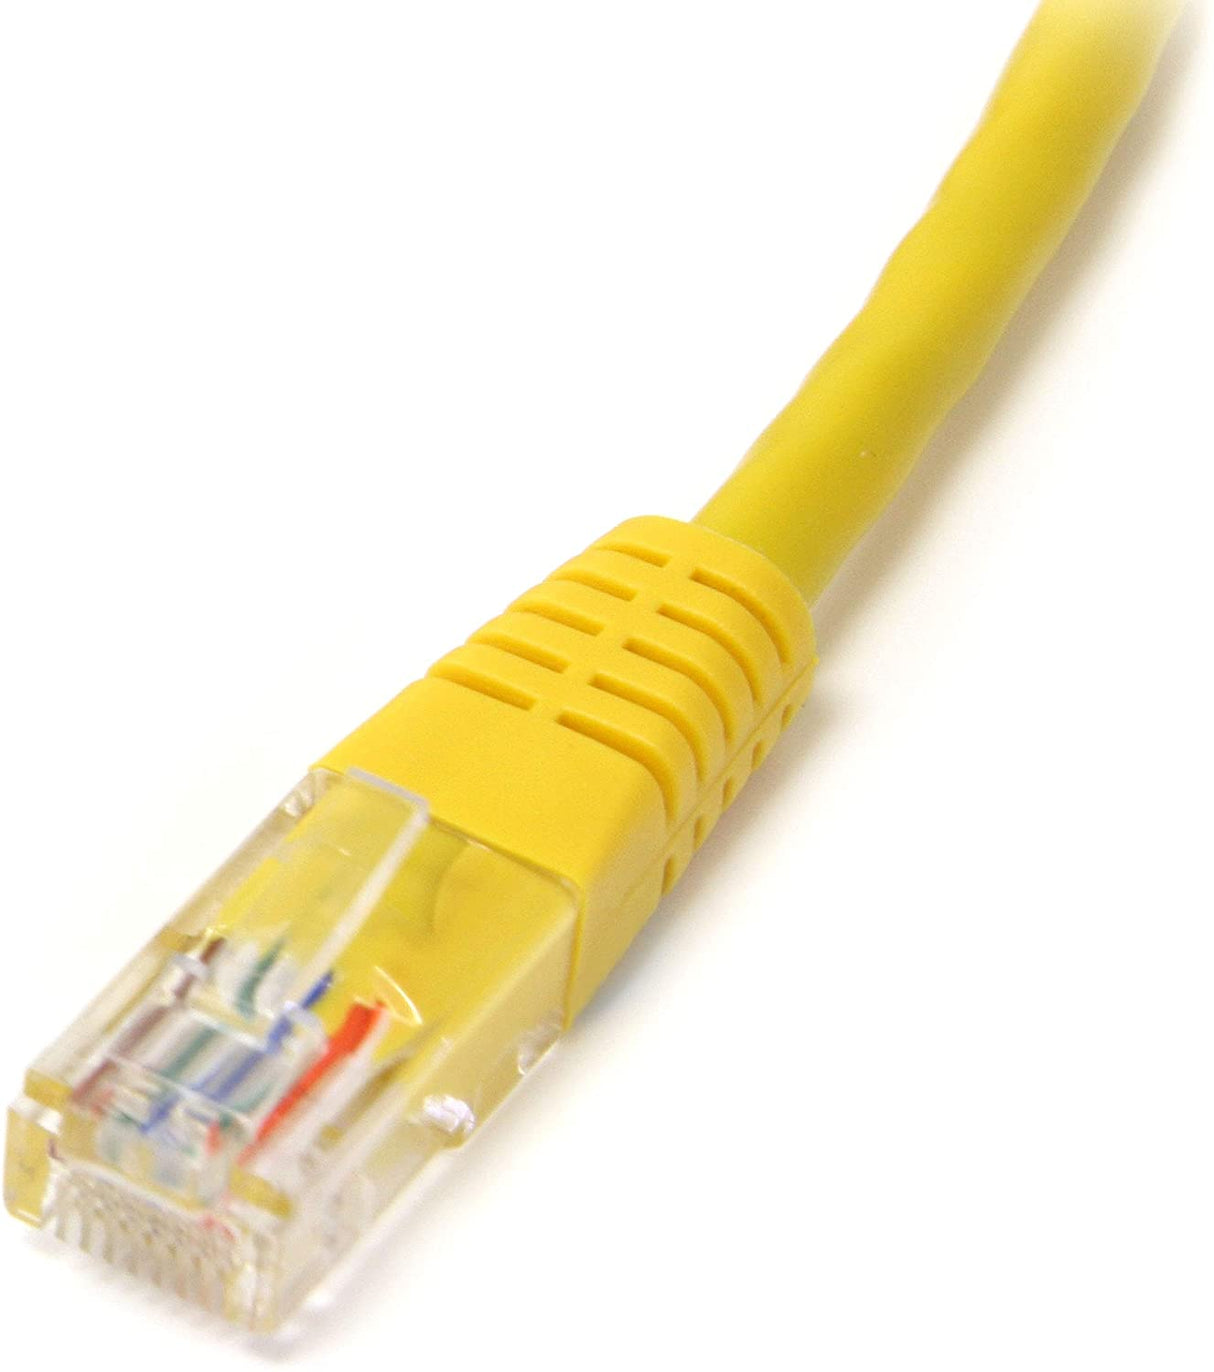 StarTech.com 1 ft. (0.3 m) Cat5e Ethernet Cable - Power Over Ethernet - Molded - Yellow - Ethernet Network Cable (M45PATCH1YL) 1 ft / 30cm Yellow